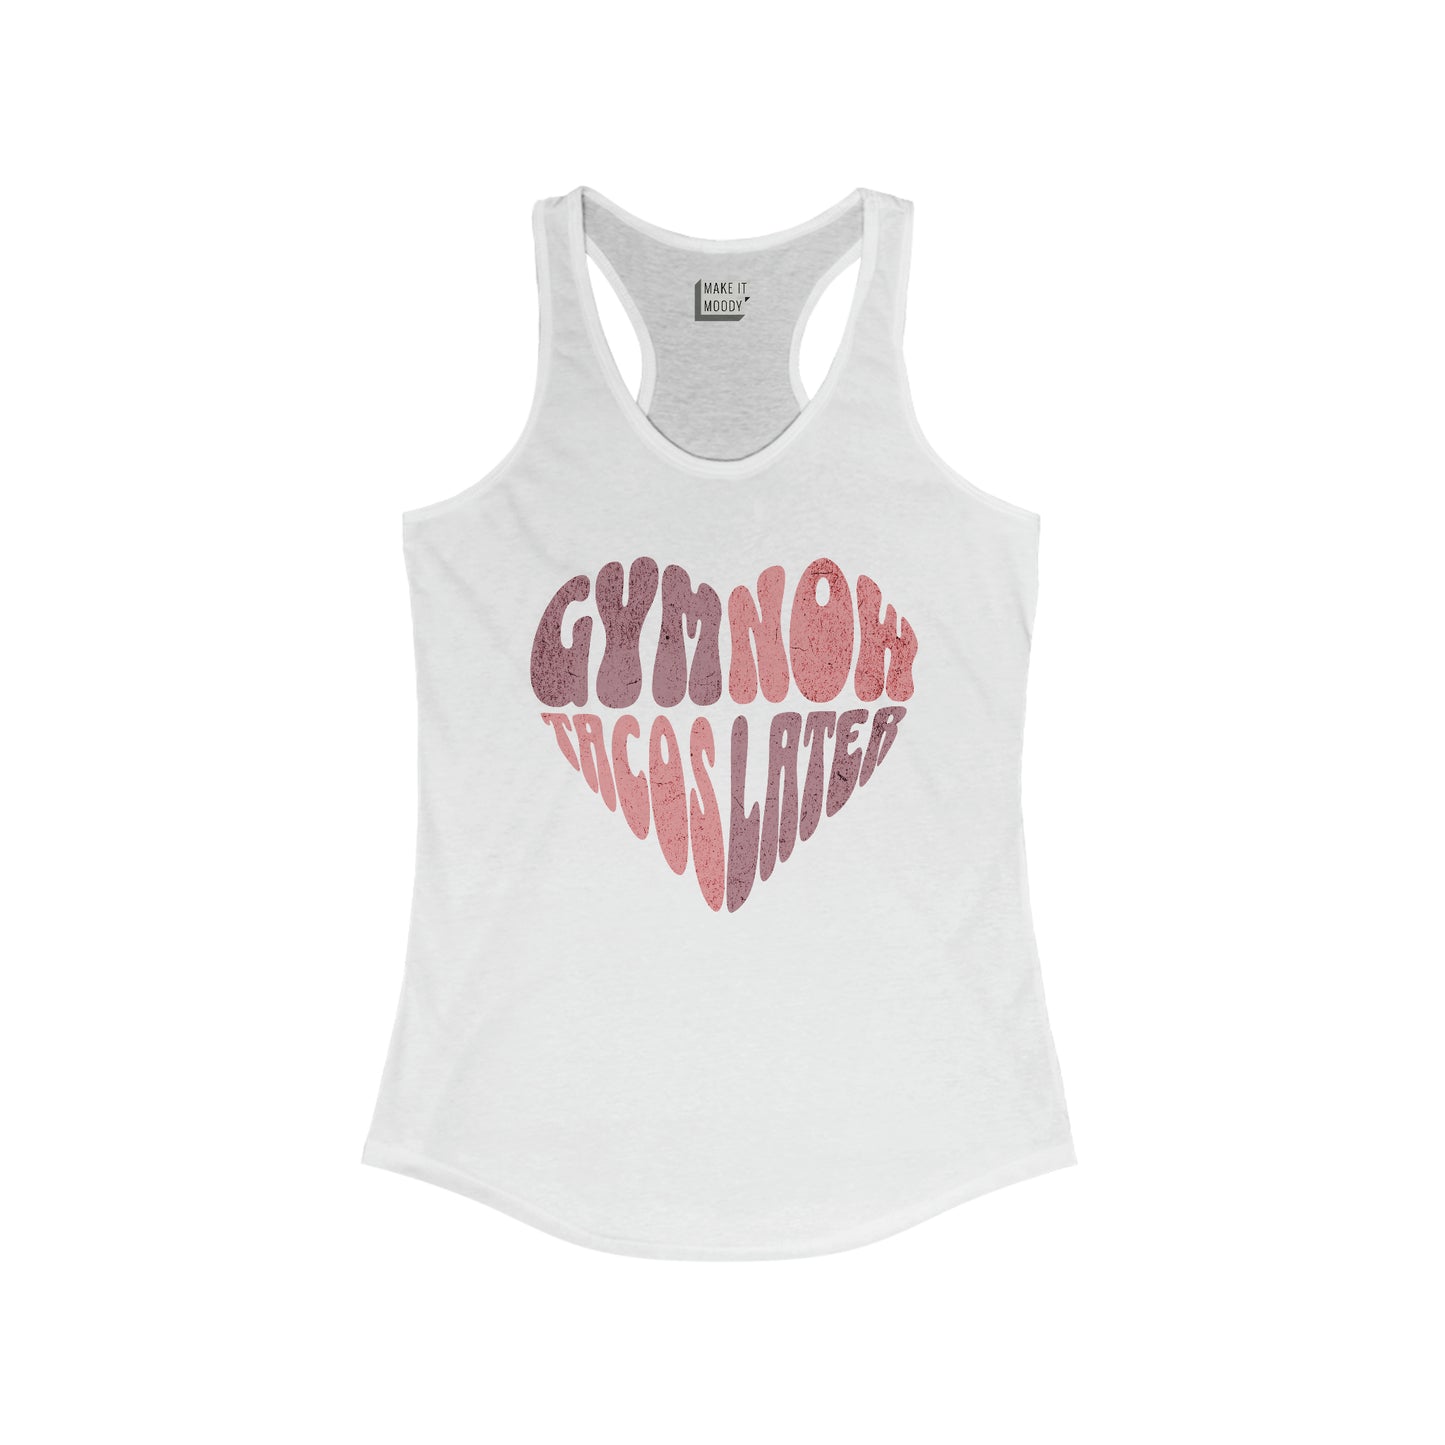 "Gym Now Tacos Later" Gym Tank